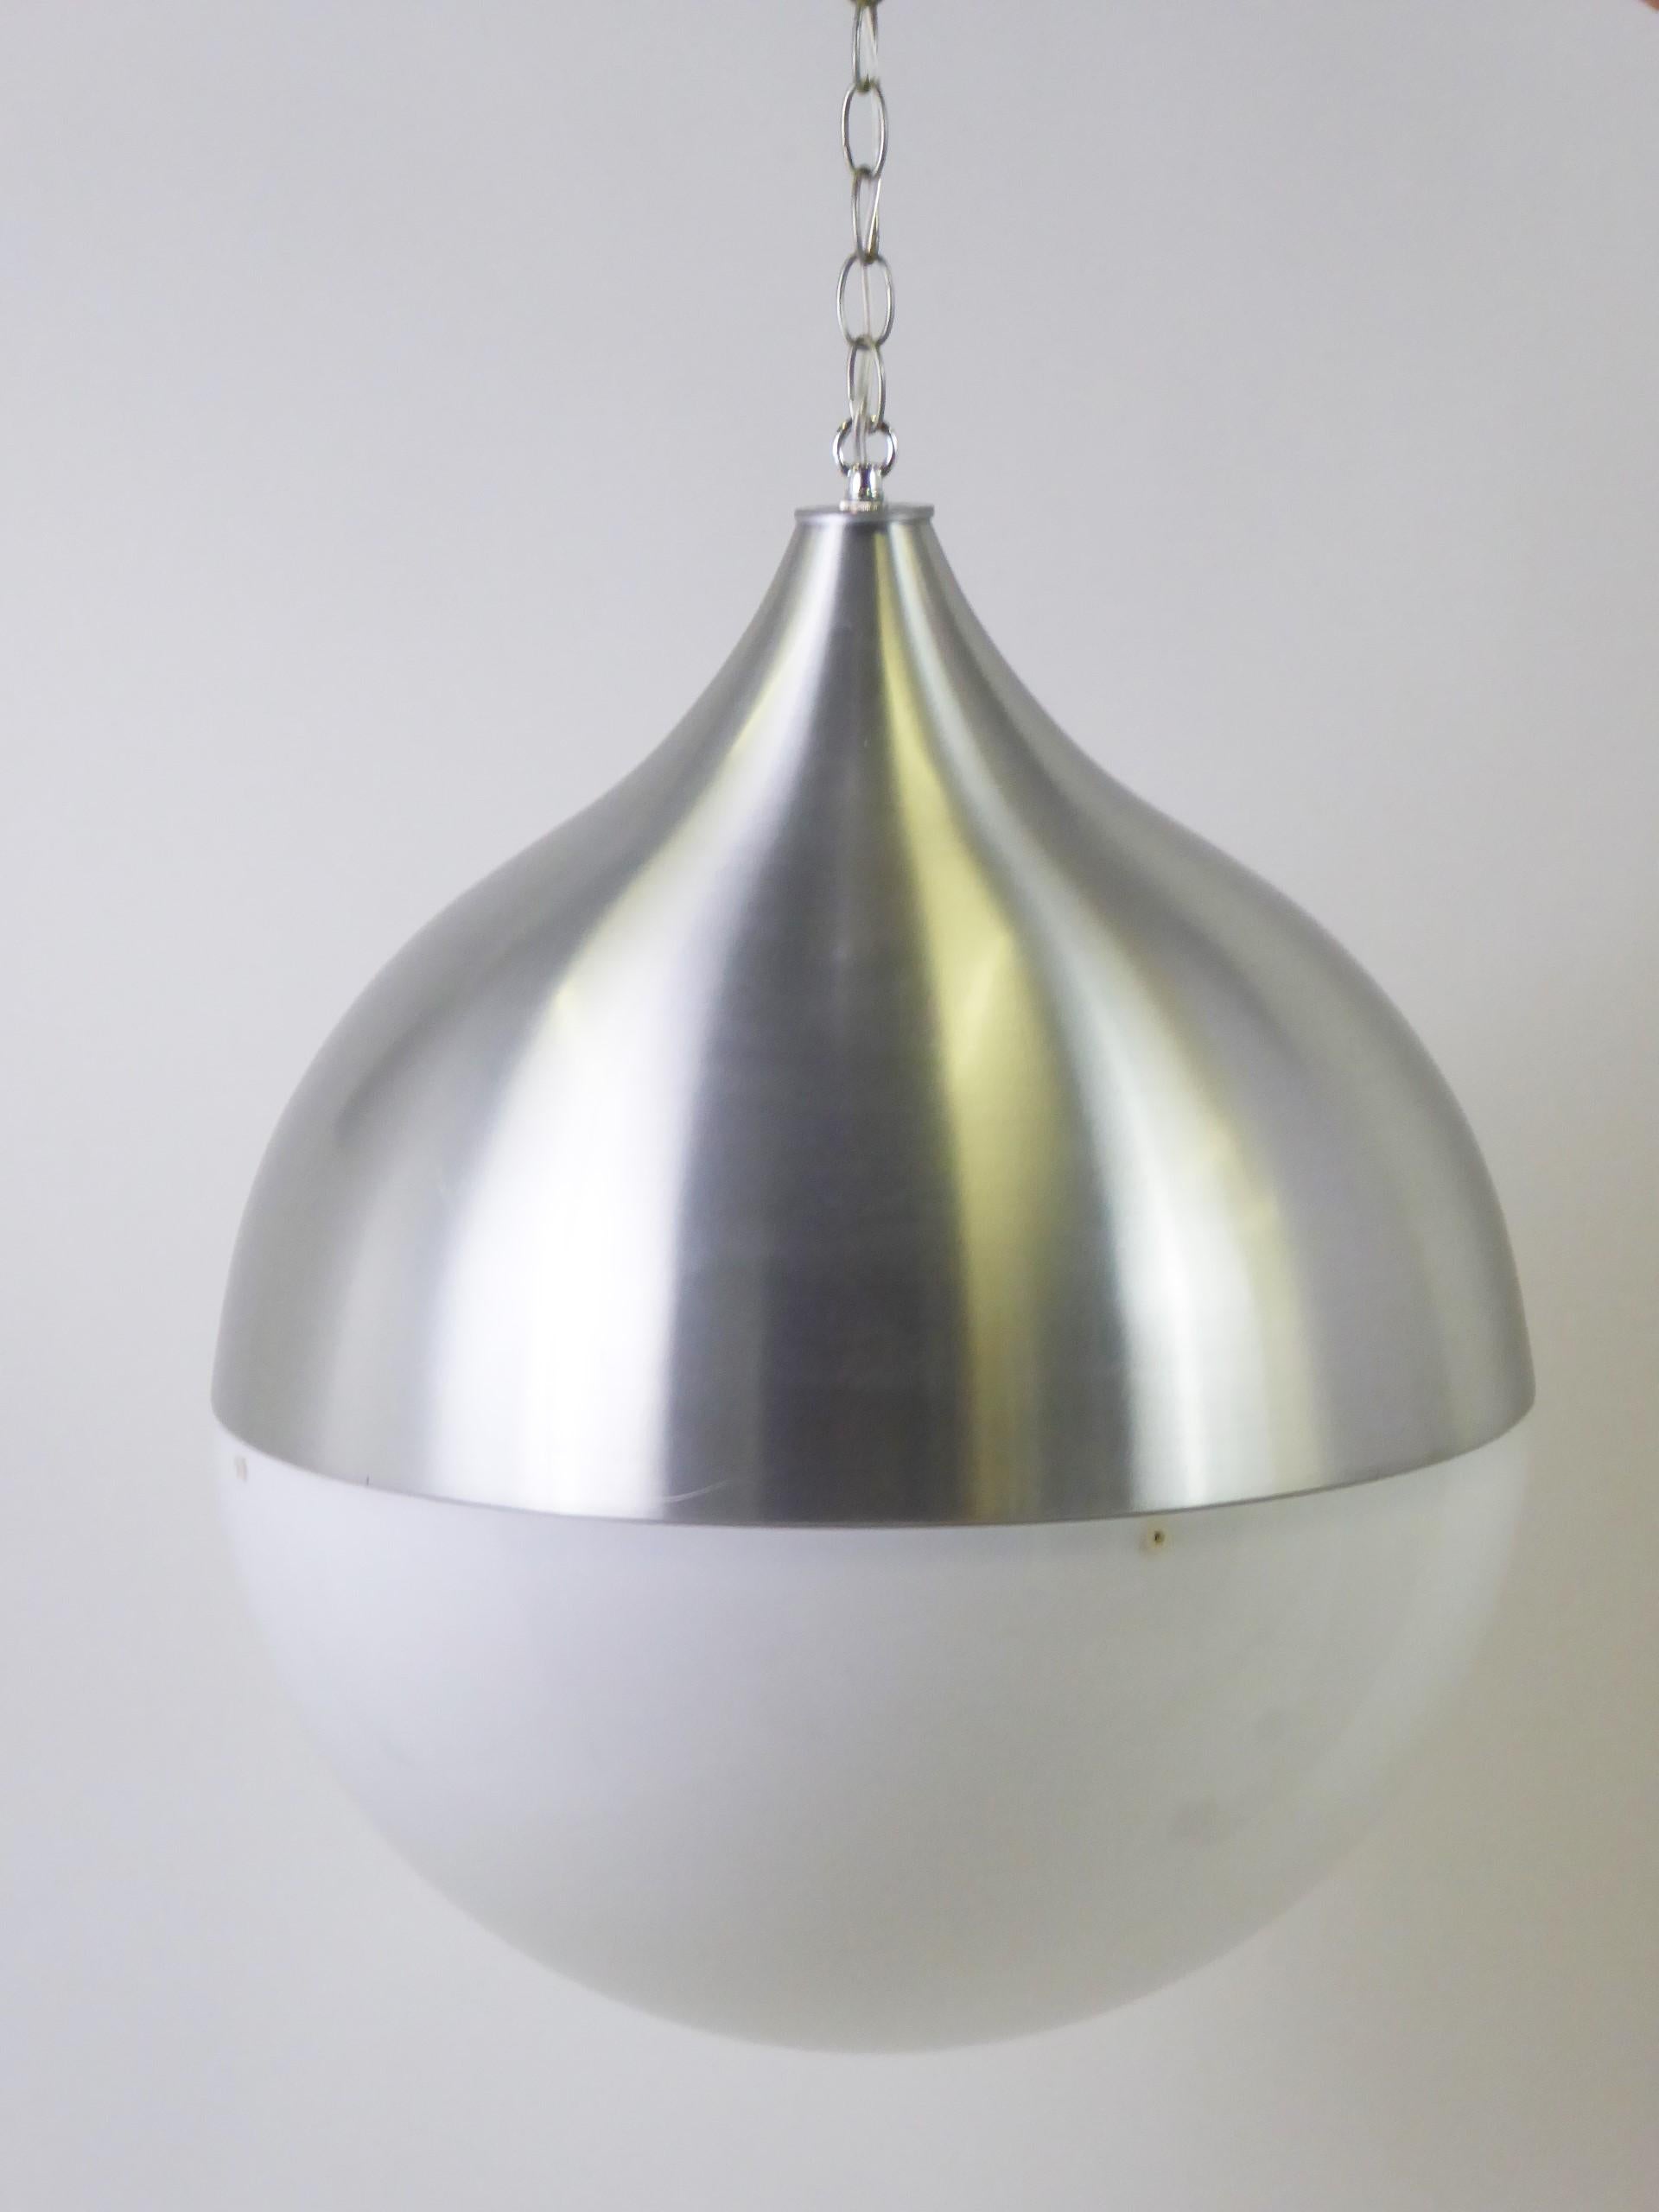 Large Danish globe chandelier with a brushed aluminum Hershey's Kiss shaped dome top over a white acrylic dome bottom. Taking a single medium base bulb, it has a new UL socket and wiring. The acrylic bottom has tiny buttons that slide on a track in